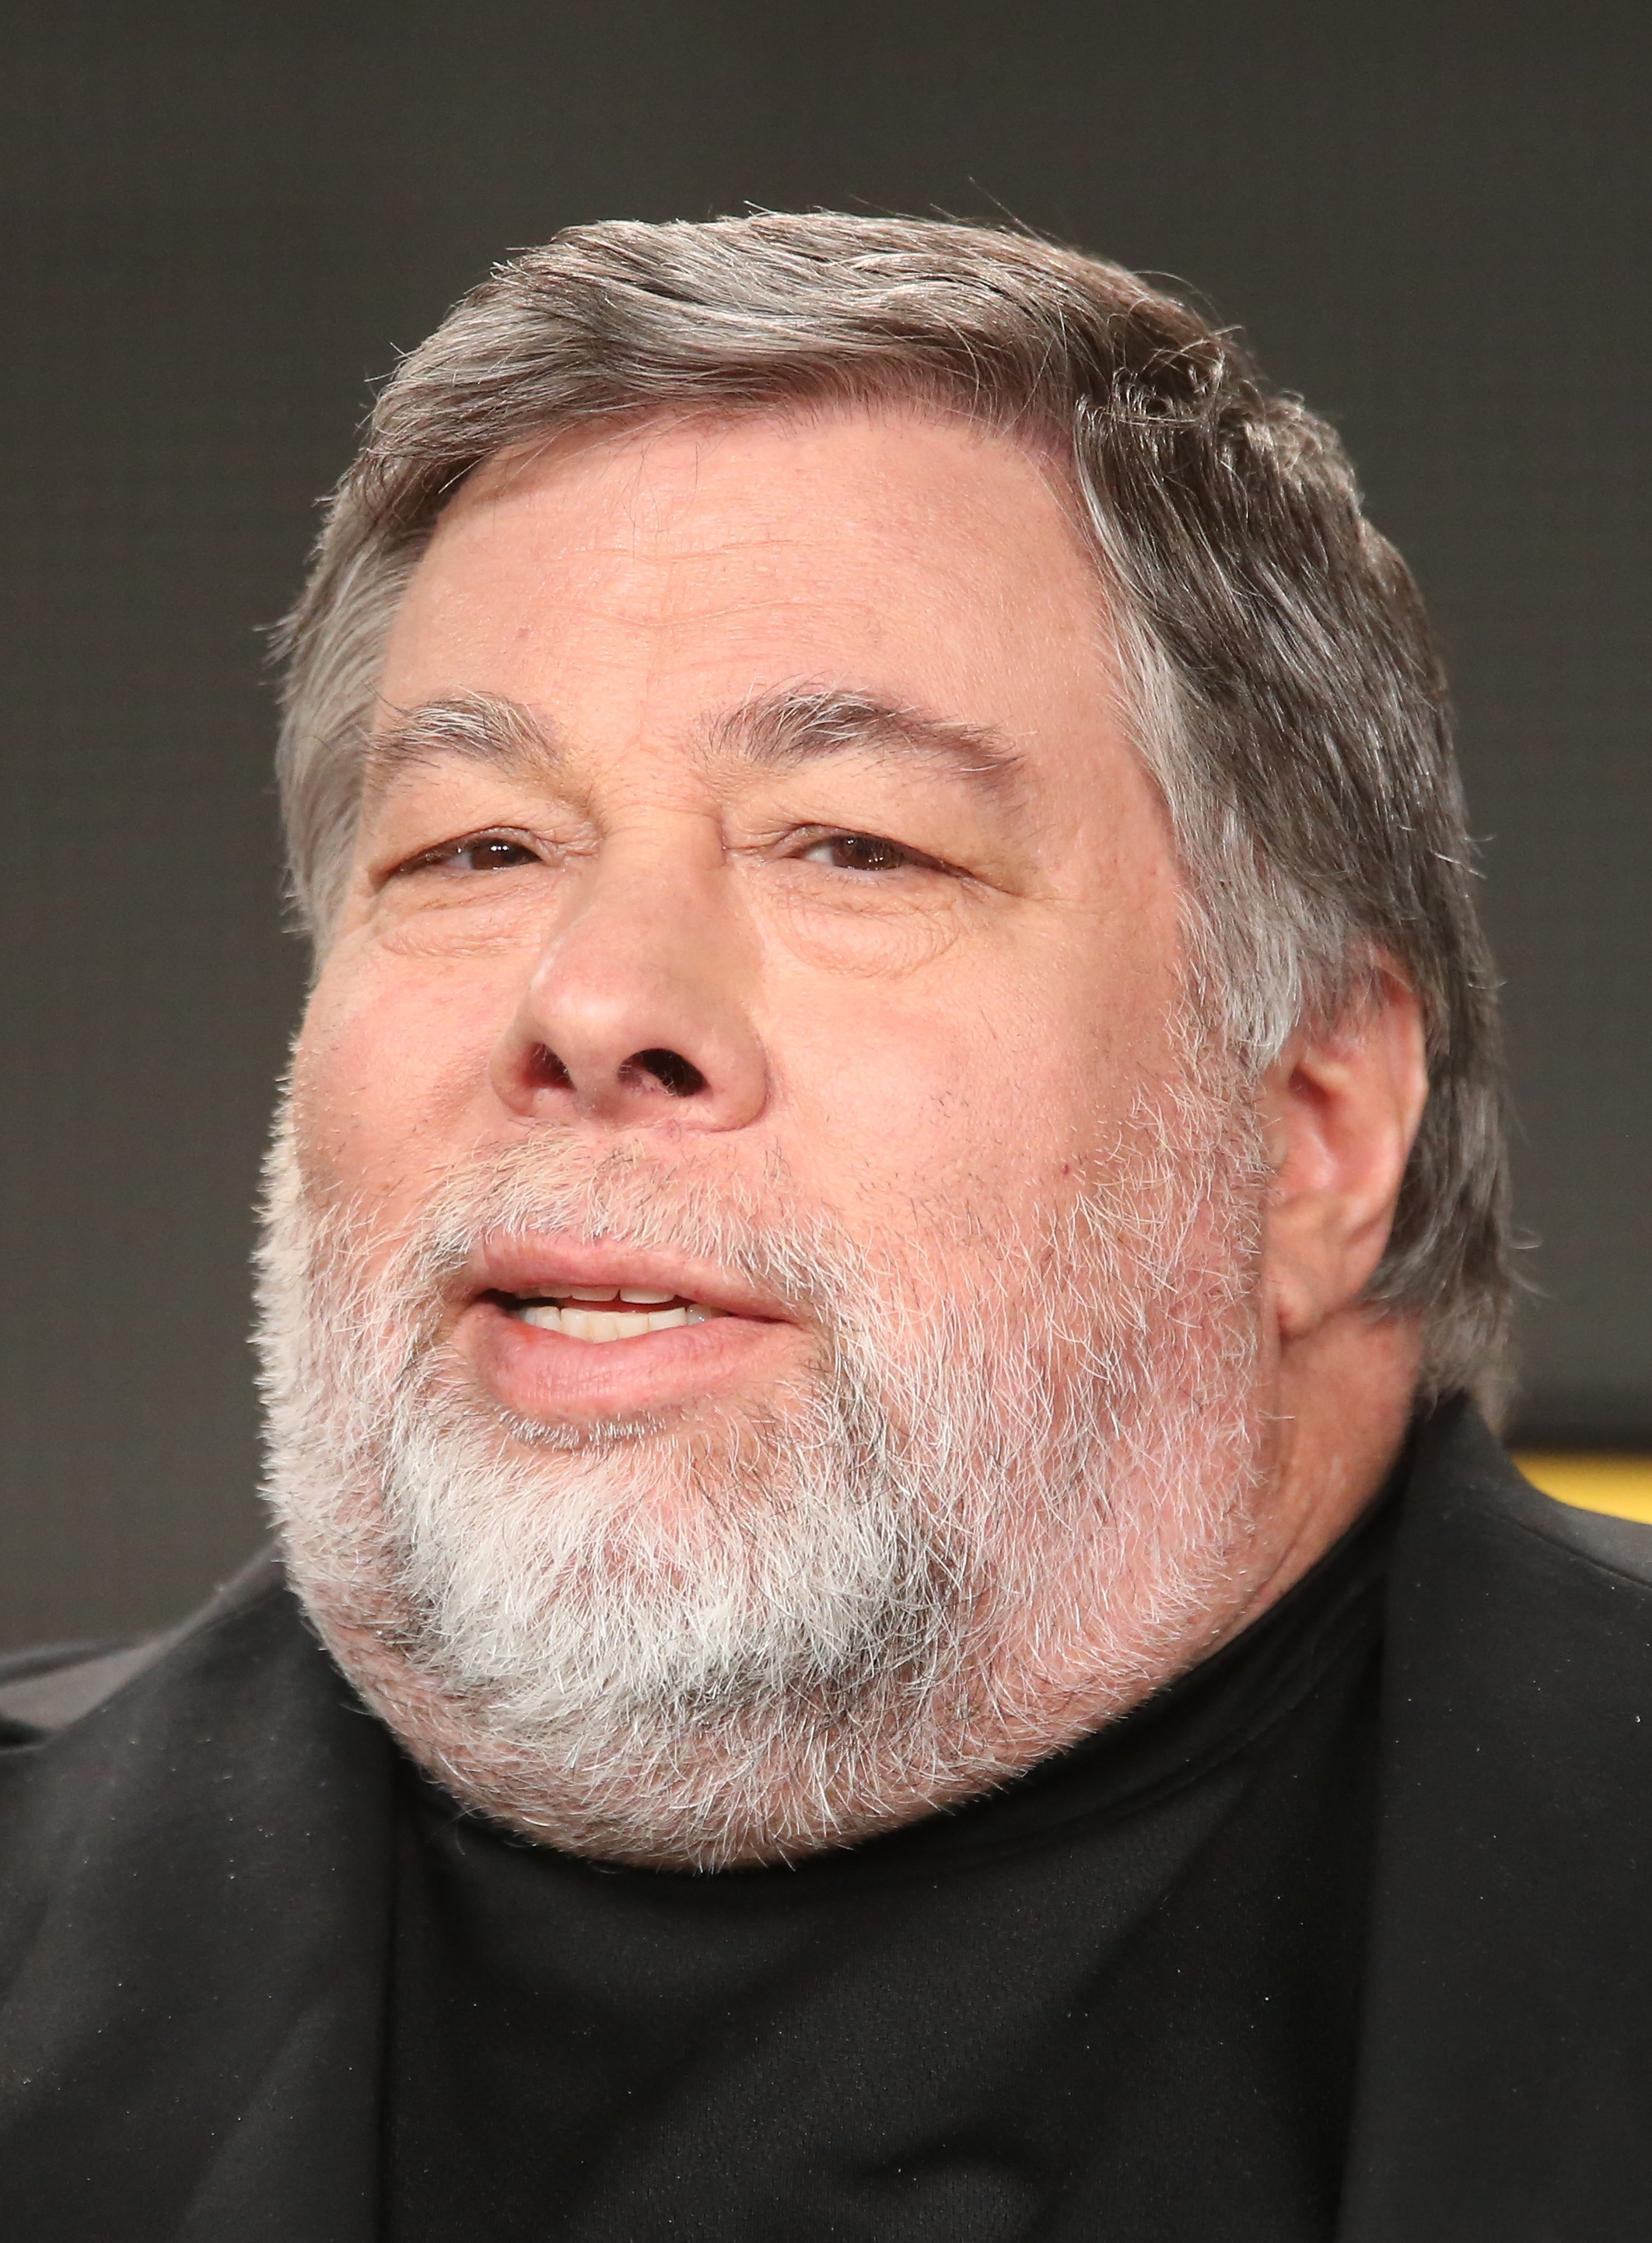 Steve Wozniak Is Getting a Wax Figure at Madame Tussauds | Time